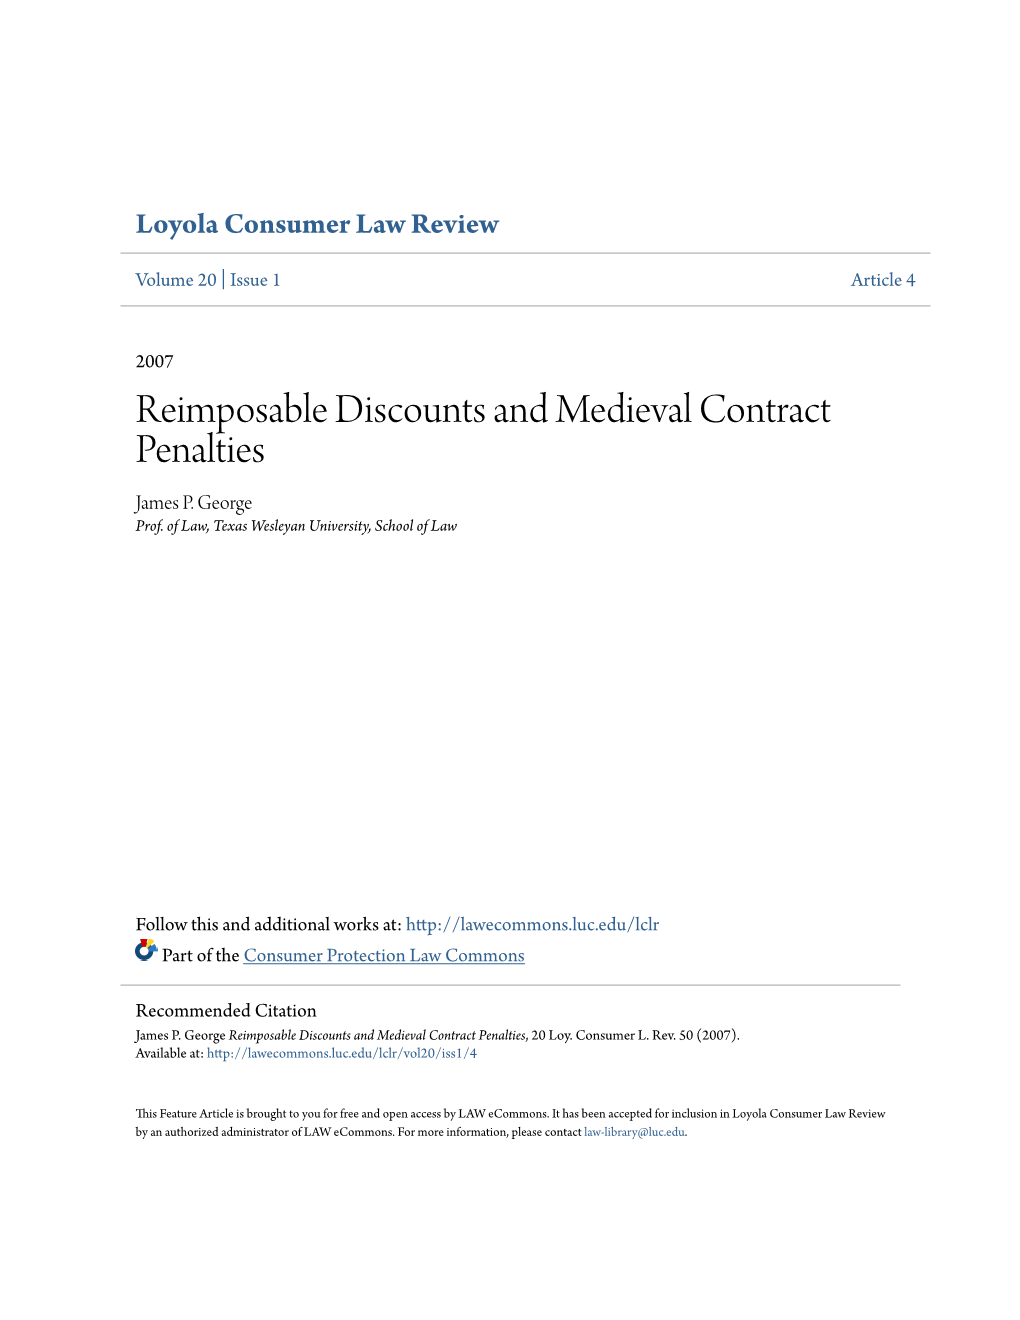 Reimposable Discounts and Medieval Contract Penalties James P